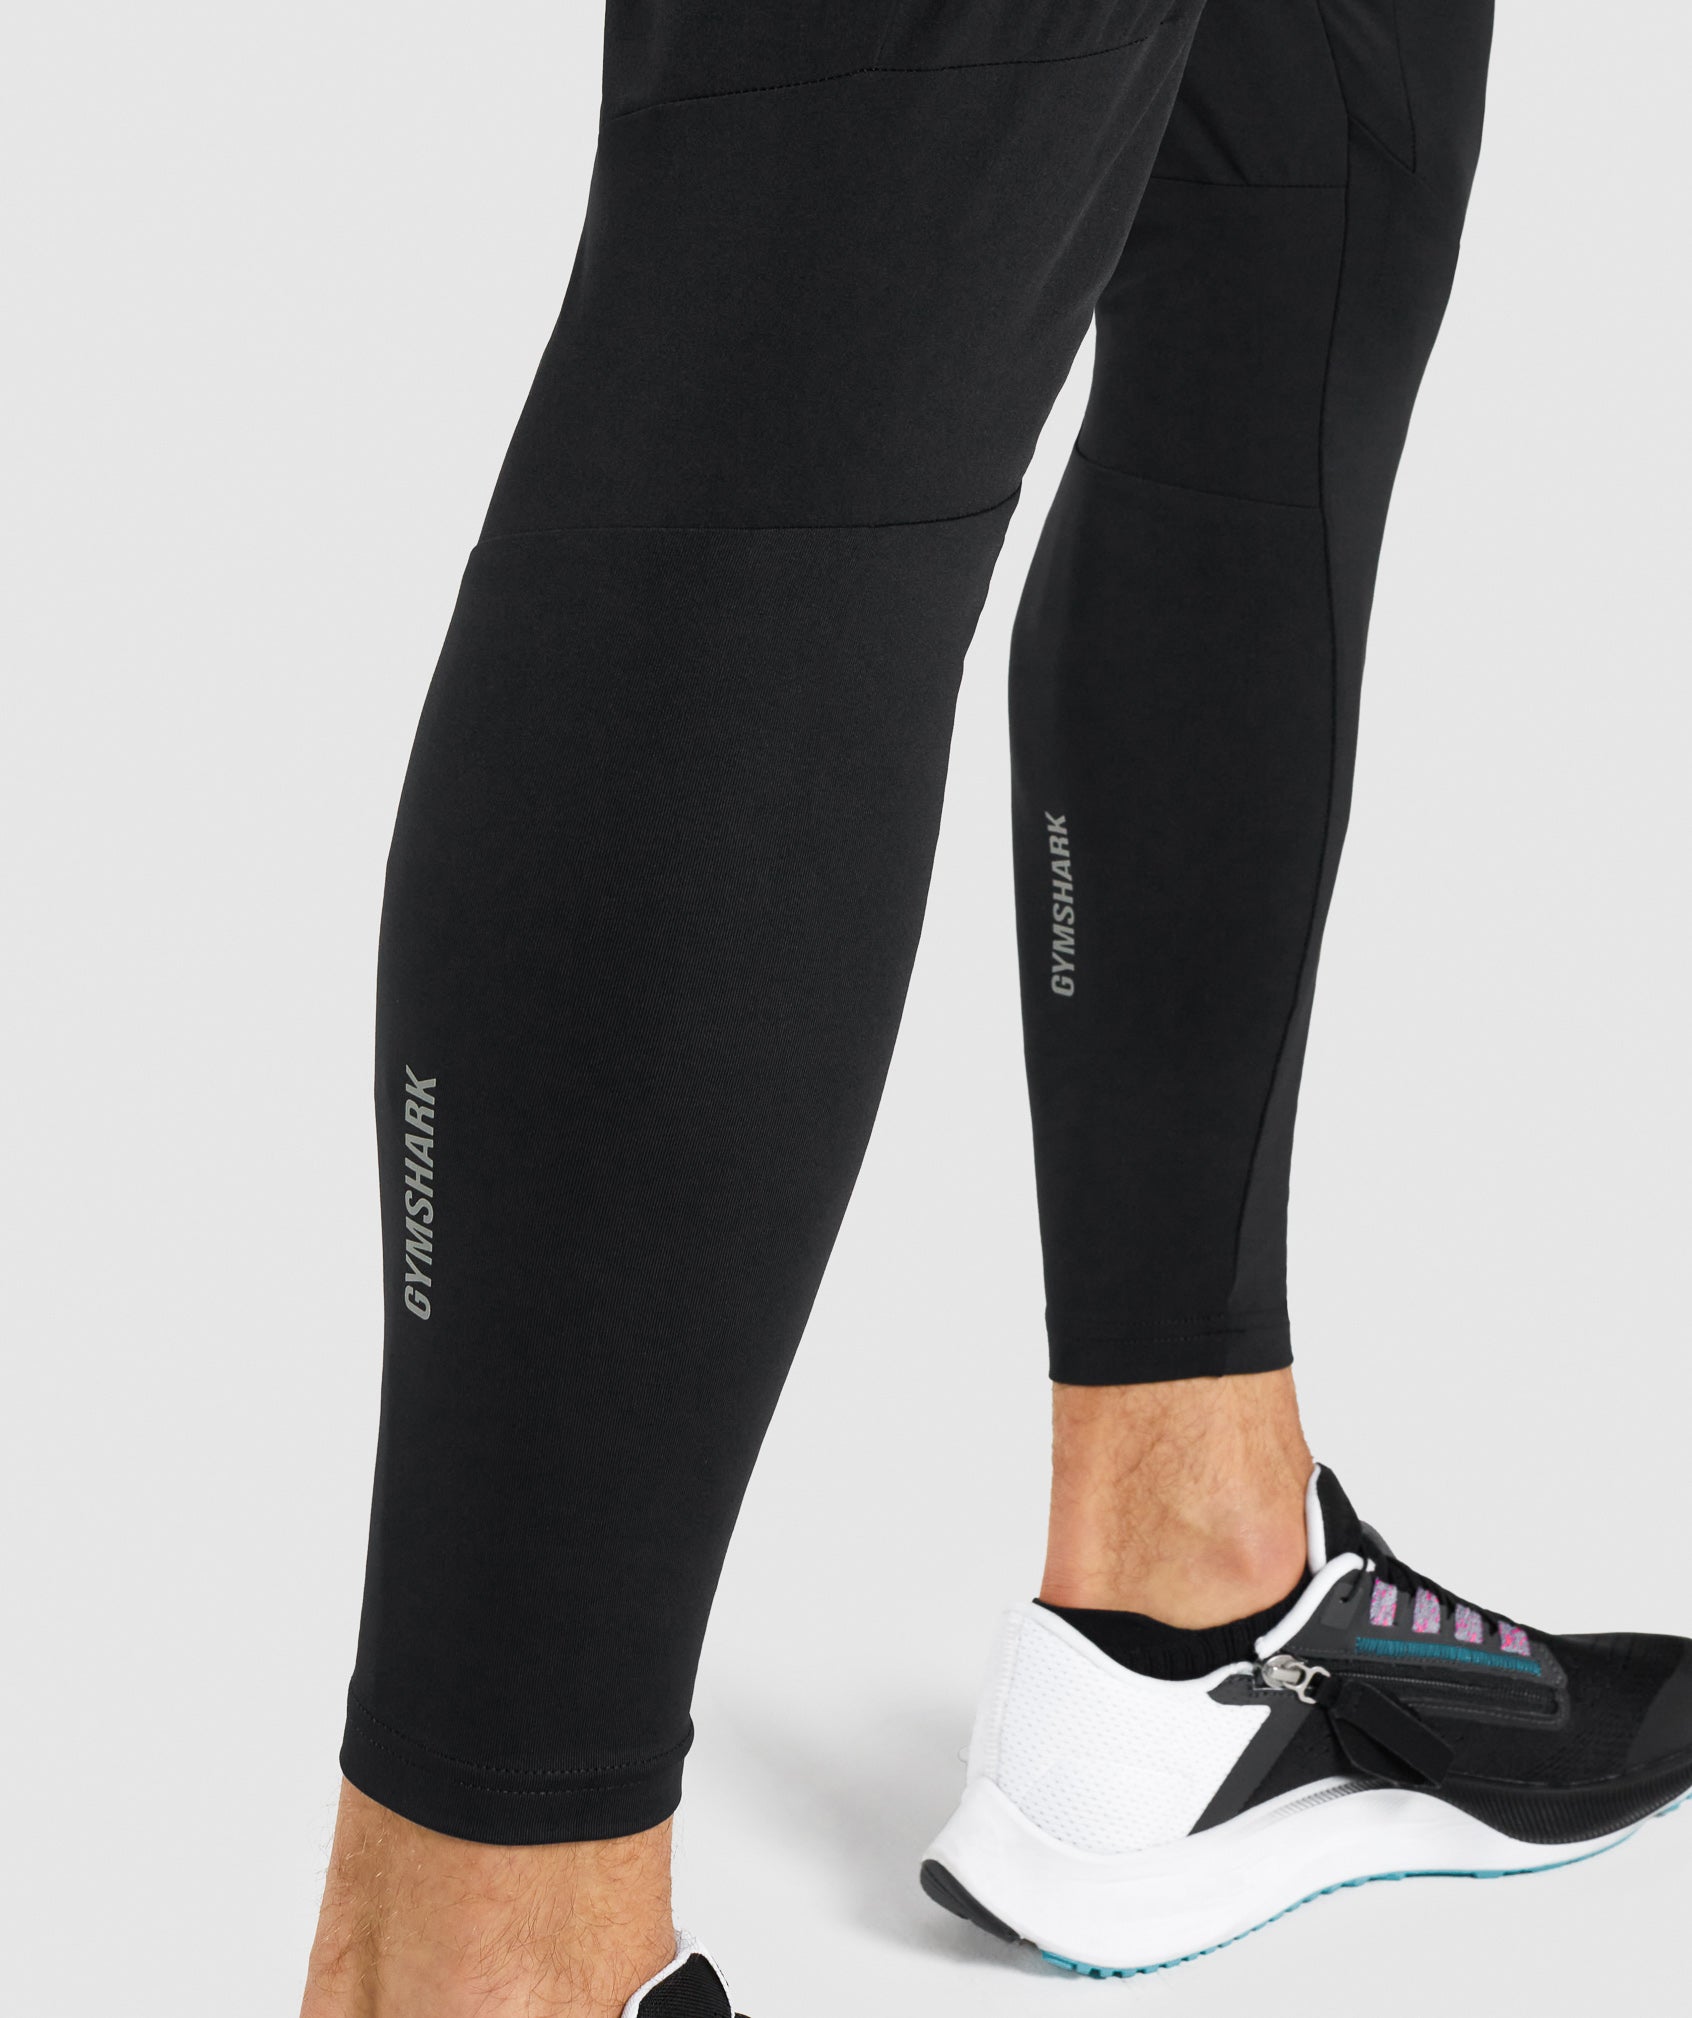 Speed Joggers in Black - view 6